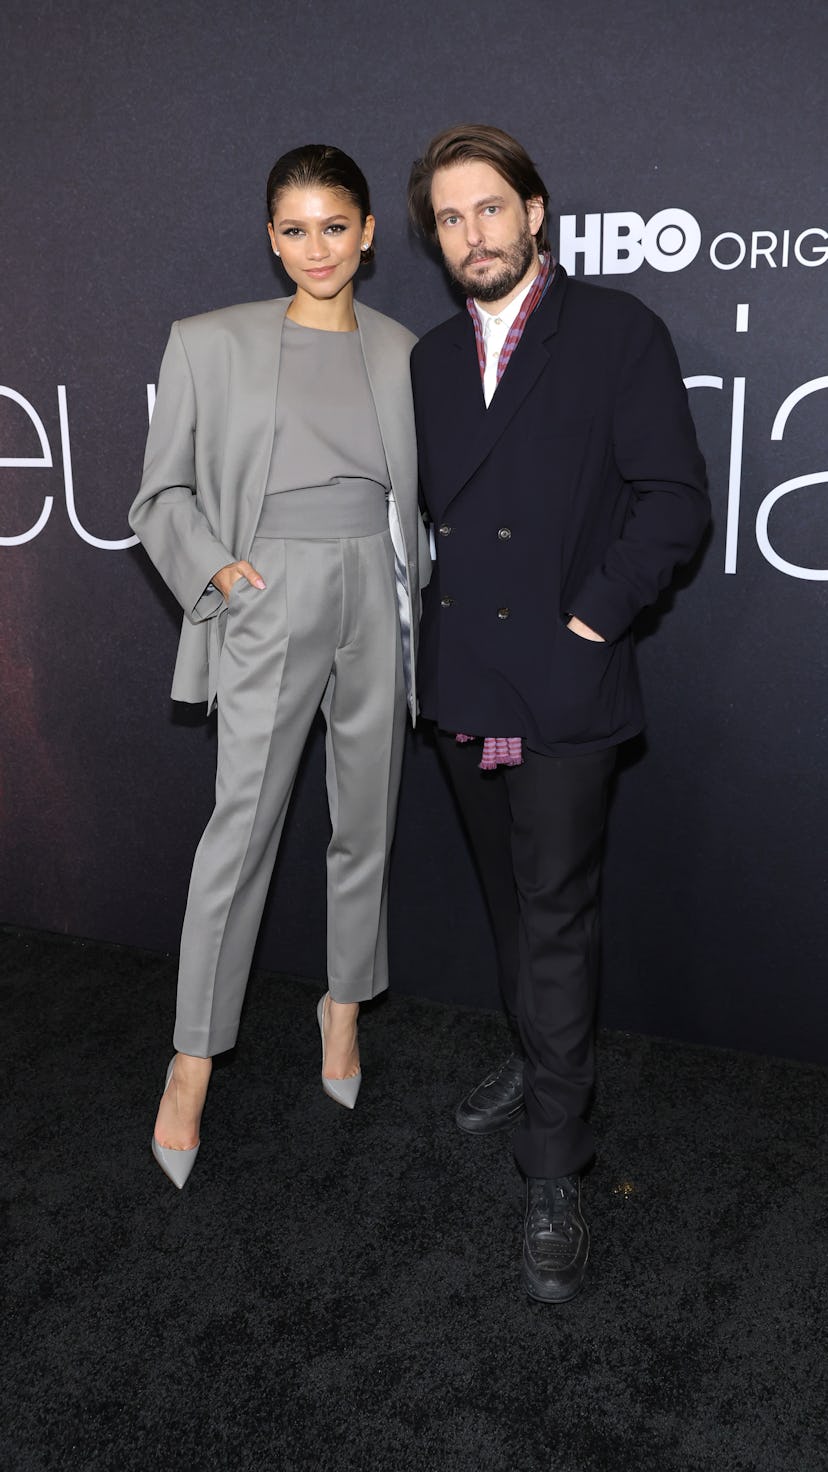 LOS ANGELES, CALIFORNIA - APRIL 20: (L-R) Zendaya and Sam Levinson attend the HBO Max FYC event for ...